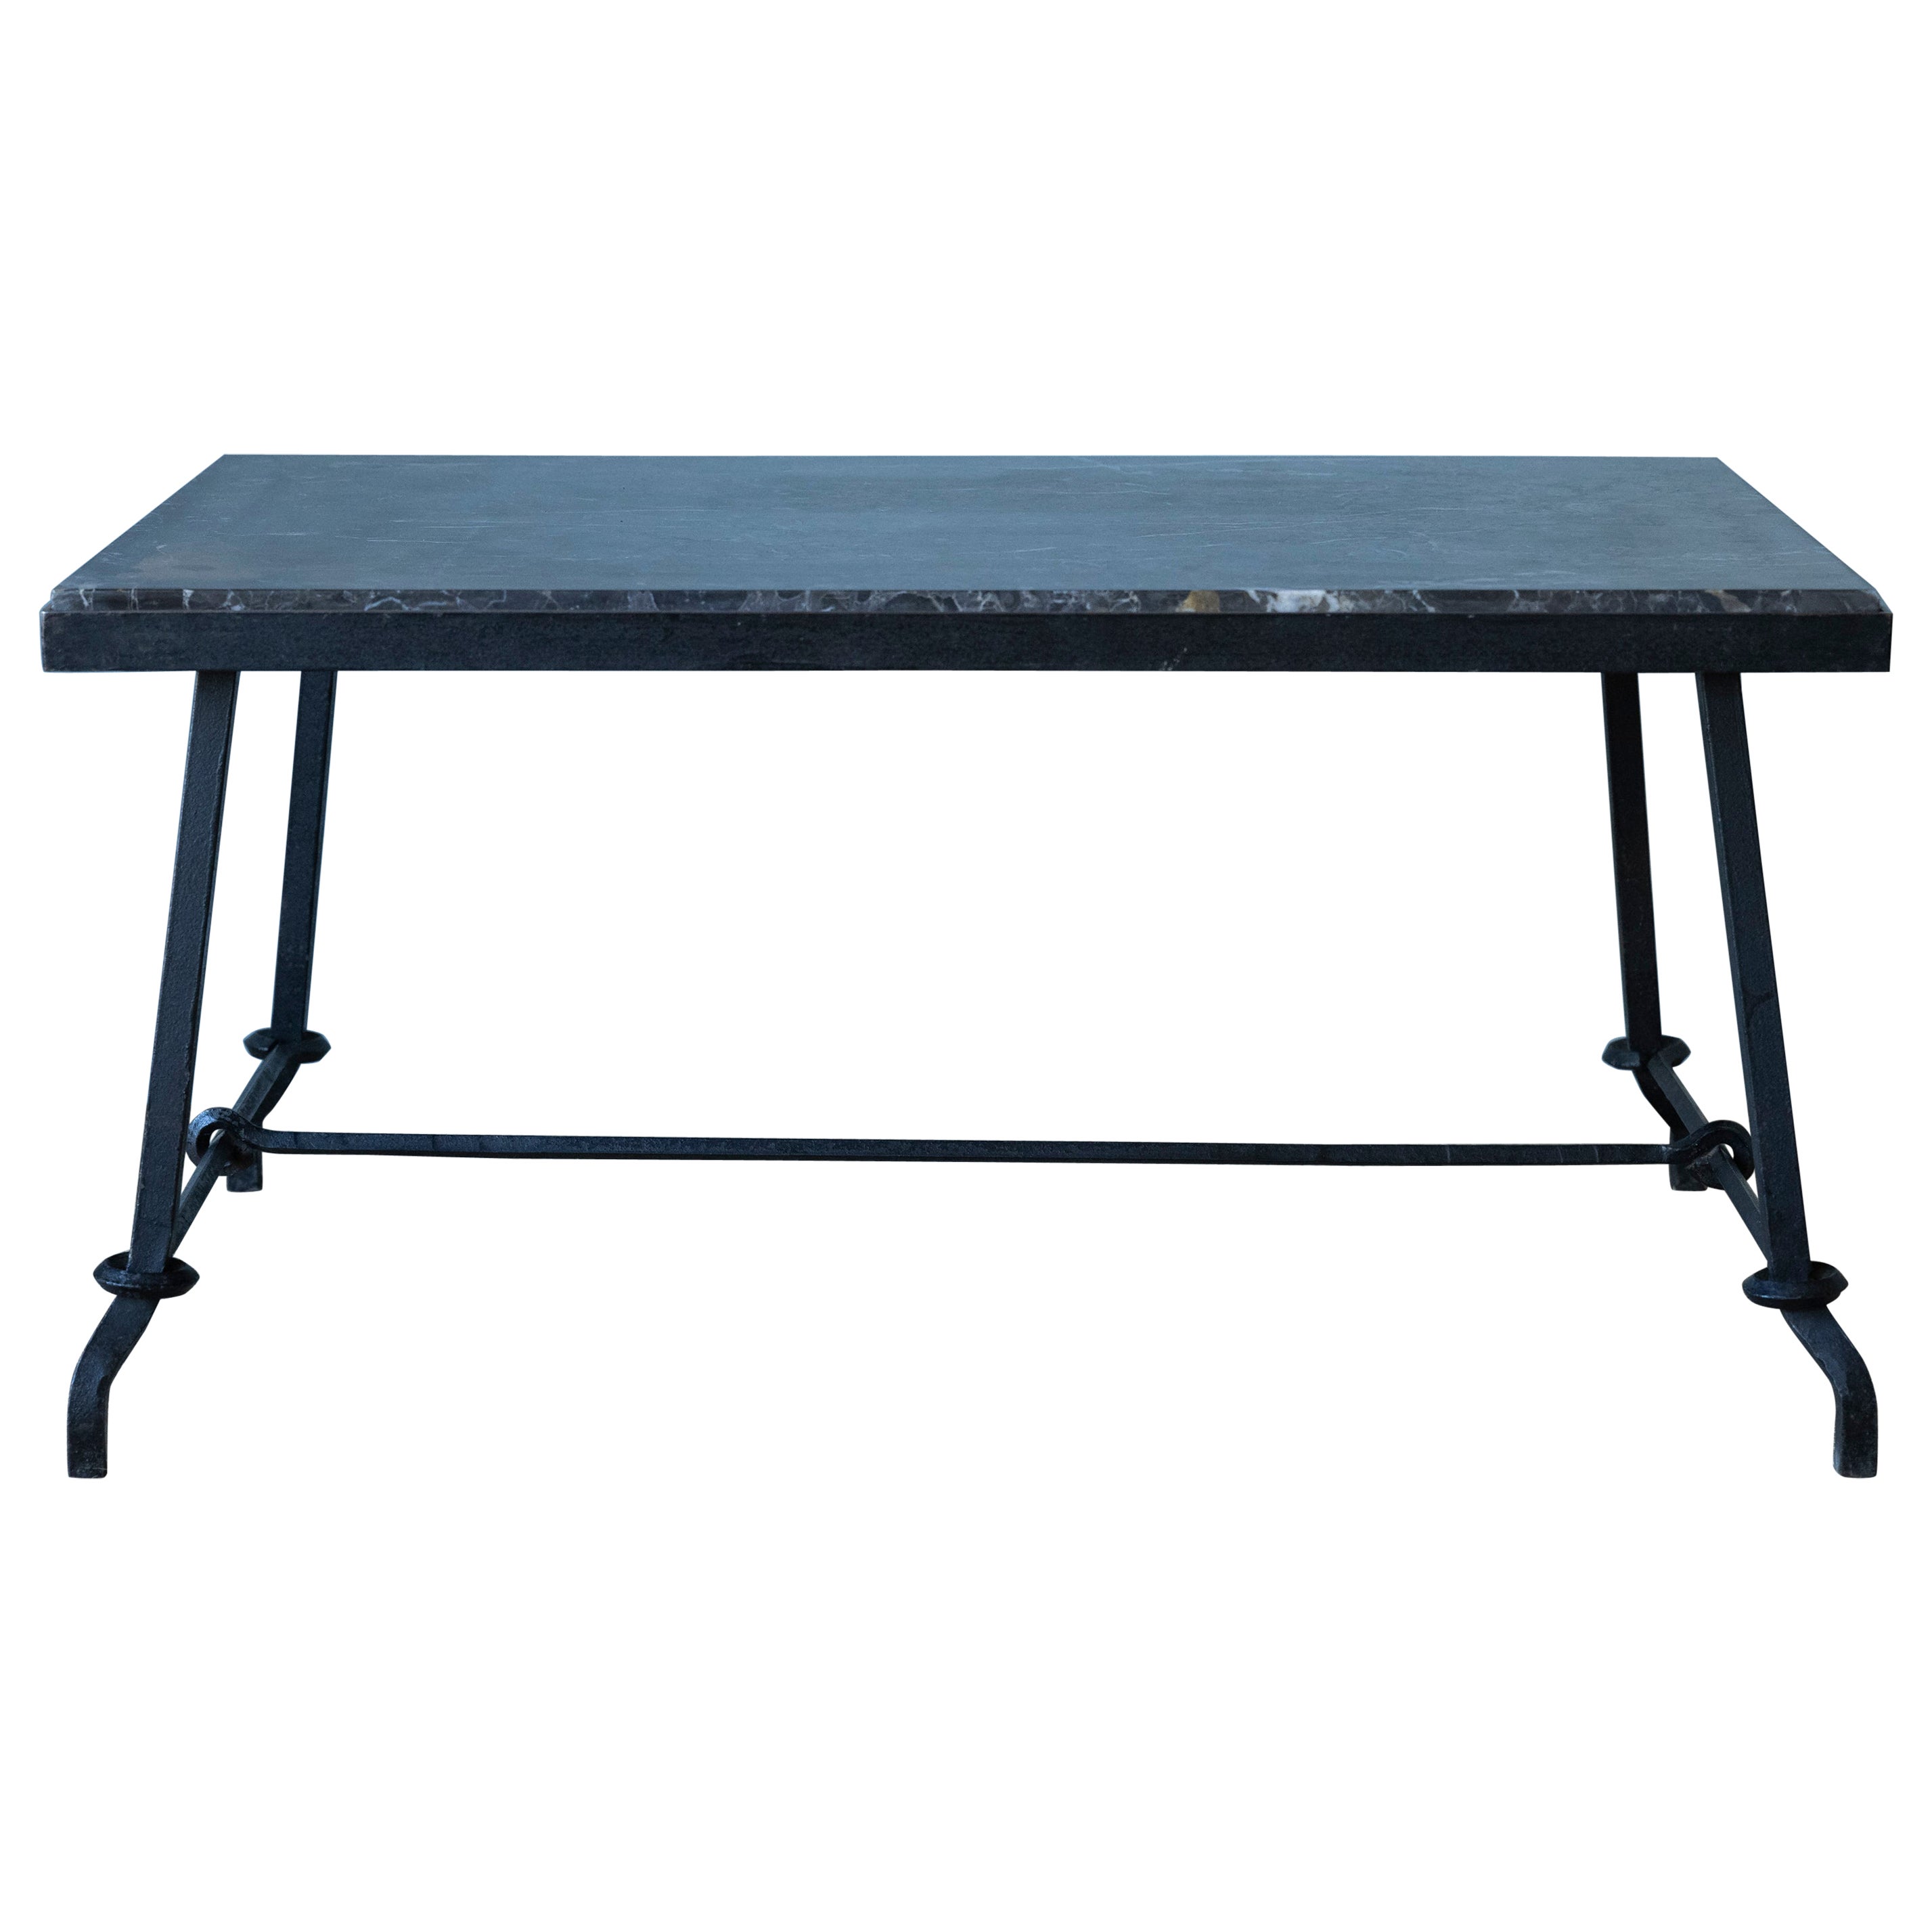 Jaques Adnet Steel Coffee Table with Marble Top